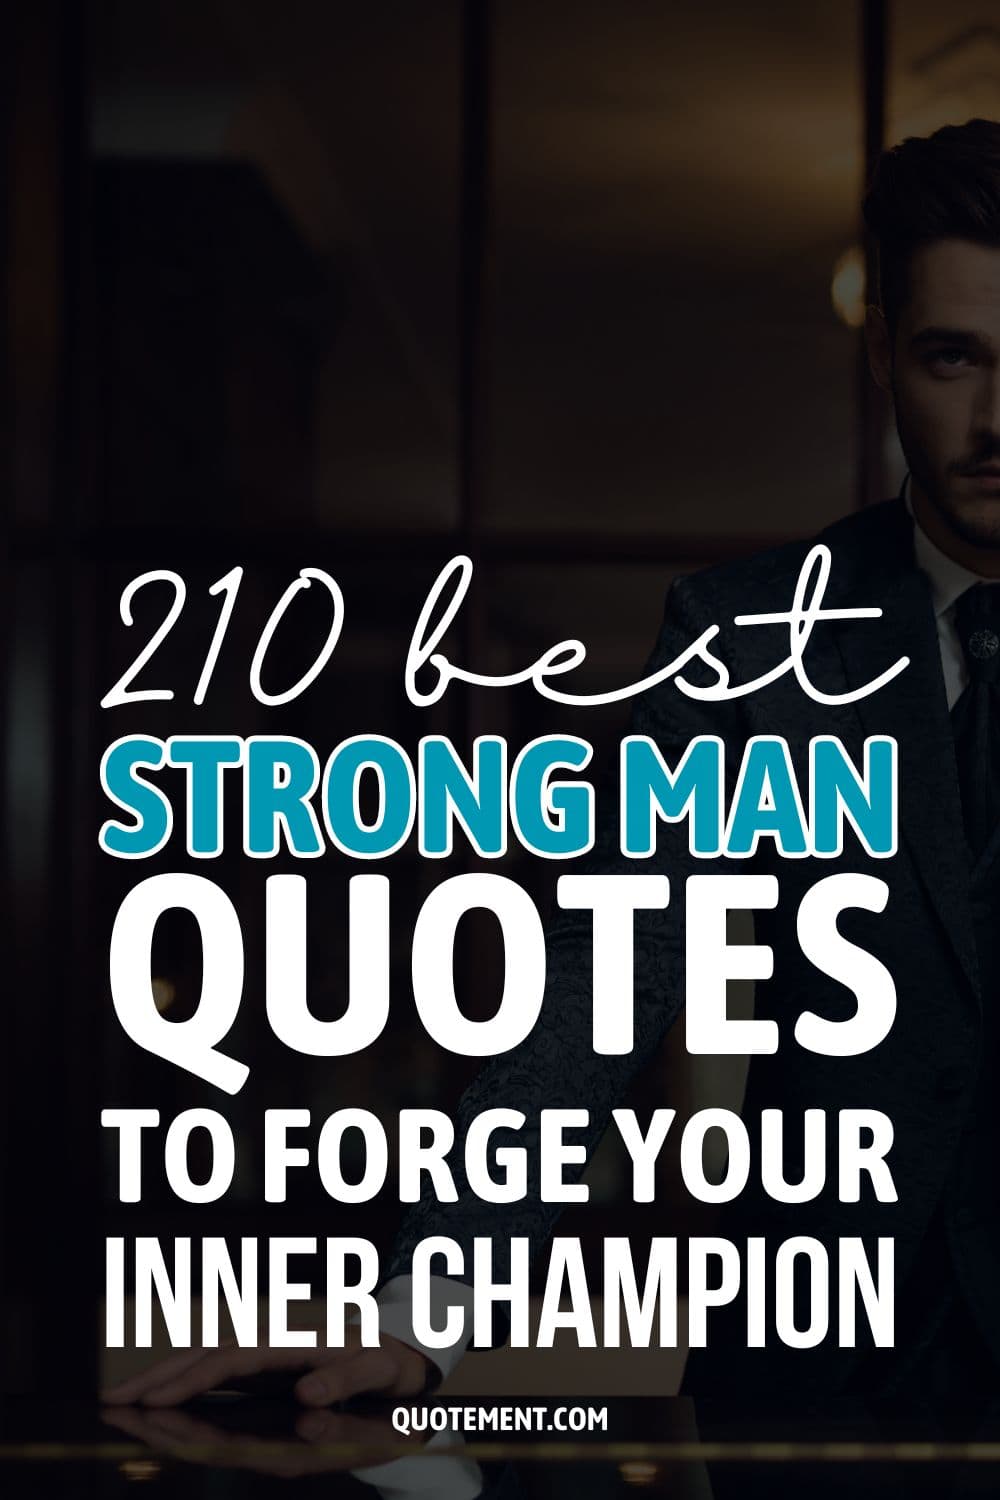 210 Best Strong Man Quotes To Forge Your Inner Champion